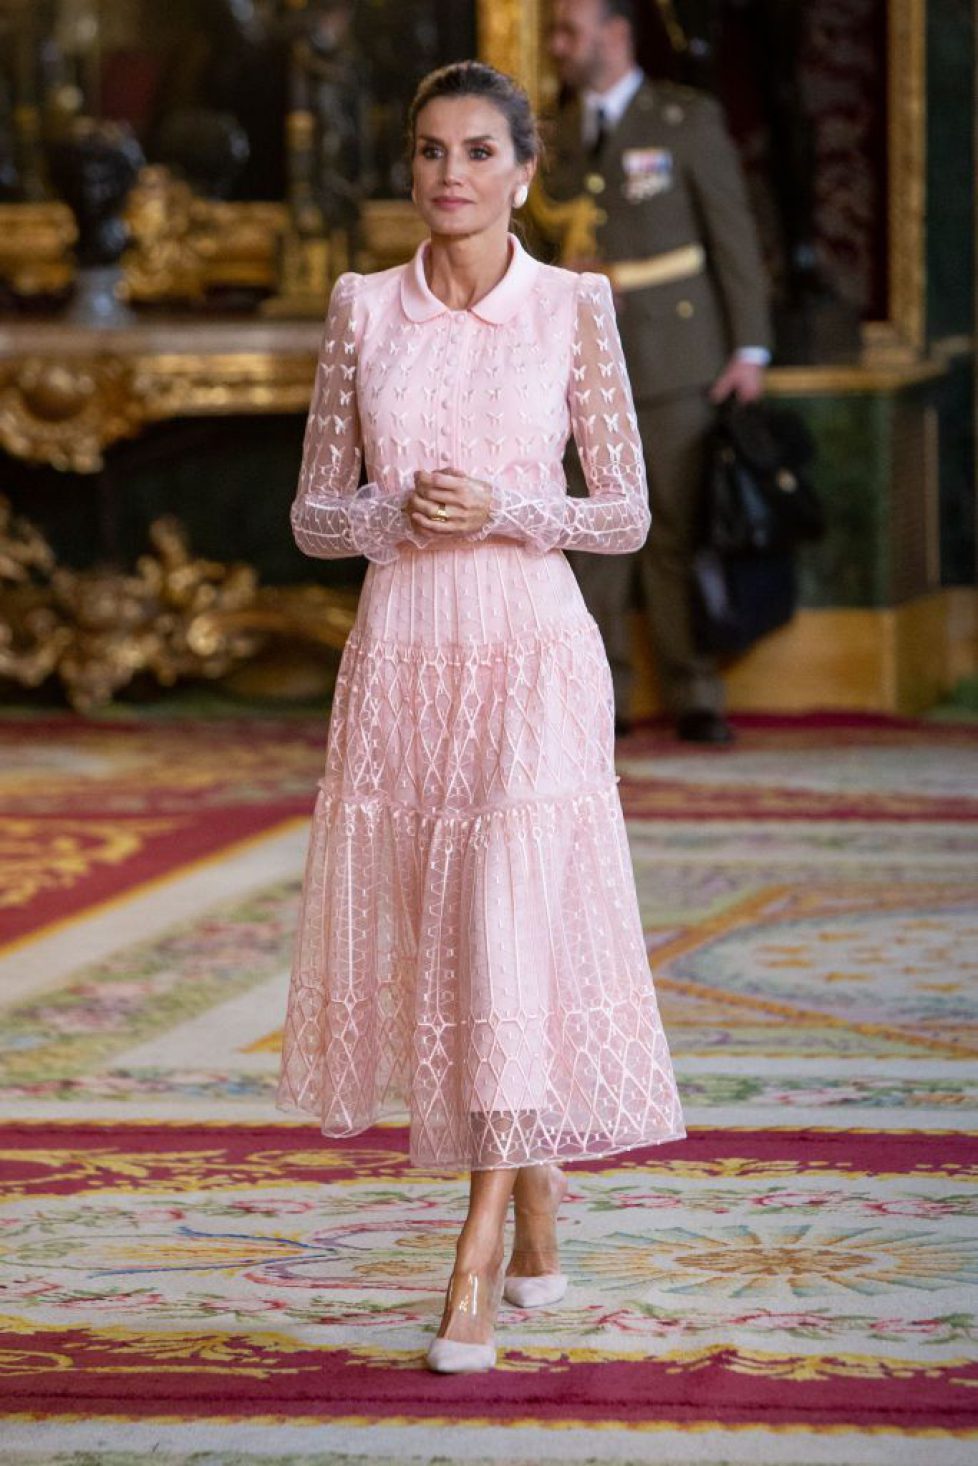 queen-letizia-of-spain-attends-a-reception-at-the-royal-news-photo-1580490780